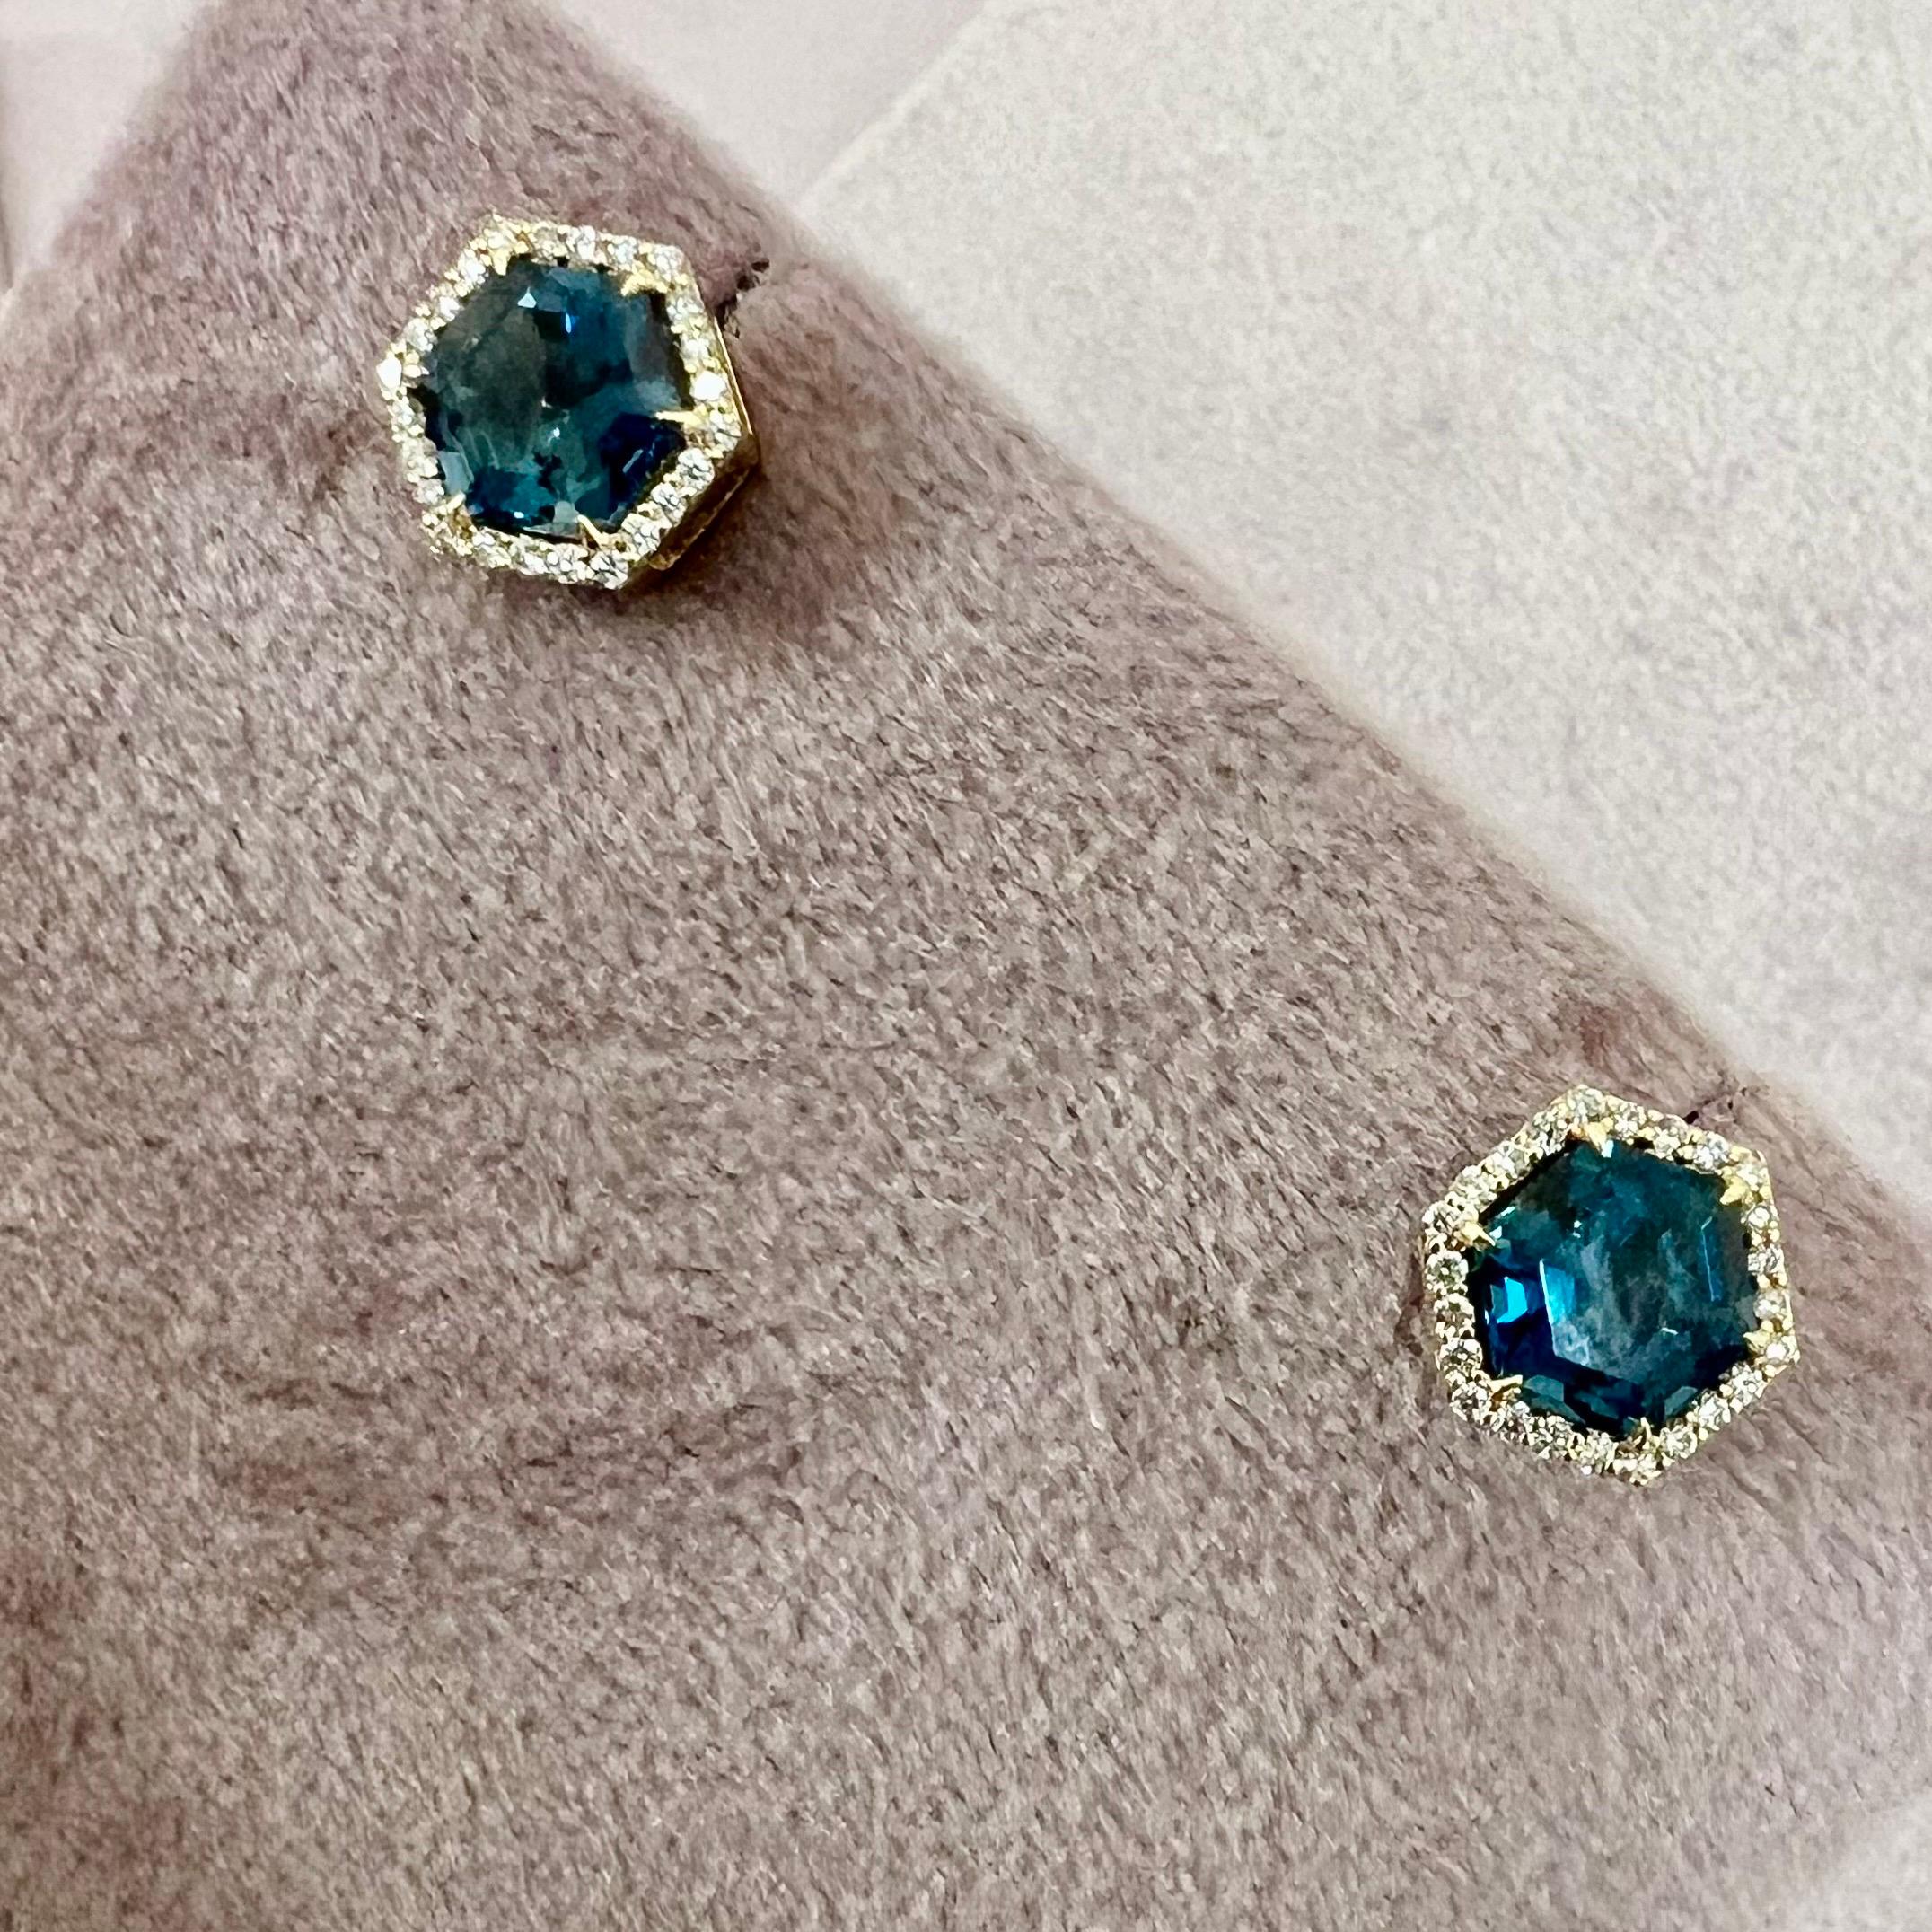 Created in 18 karat yellow gold
London blue topaz 3 carats approx.
Diamonds 0.20 carat approx.
Post backs for pierced ears
Limited Edition

Sculpted from 18 karat yellow gold, these limited edition earrings feature a languid London blue topaz—its